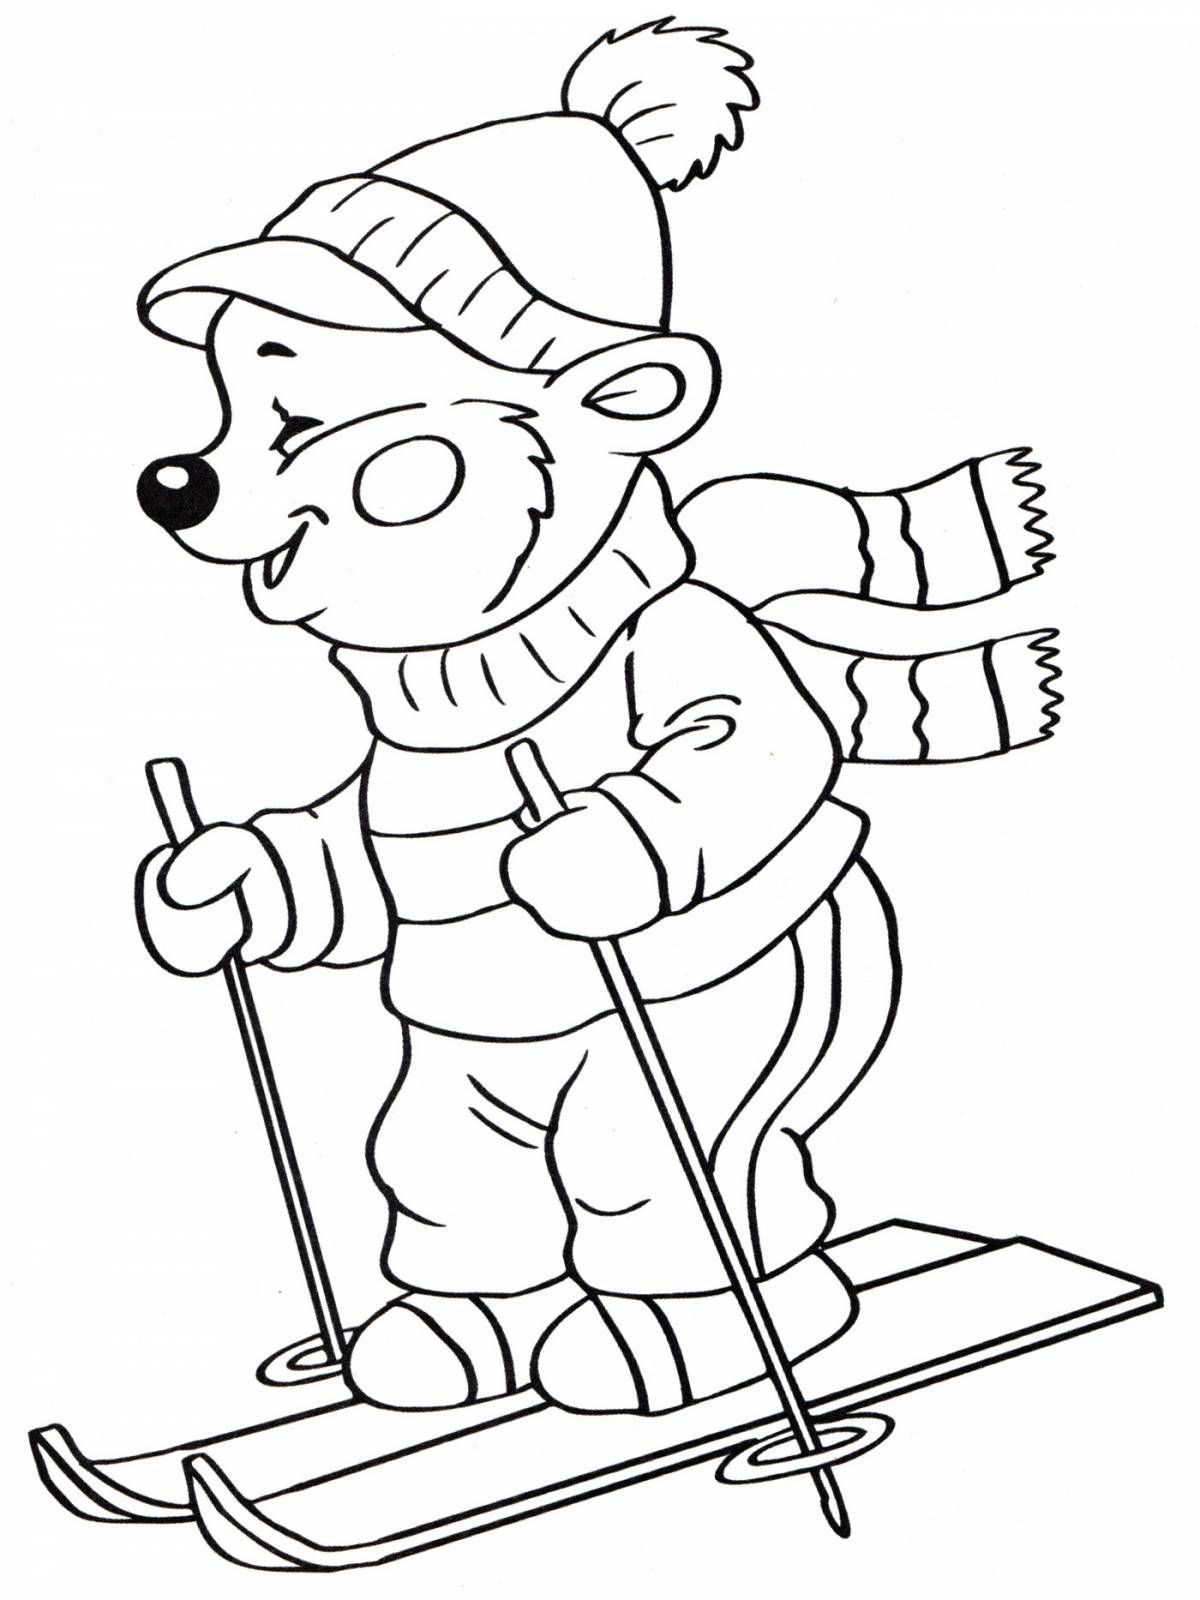 Fascinating winter sports coloring book for 6-7 year olds